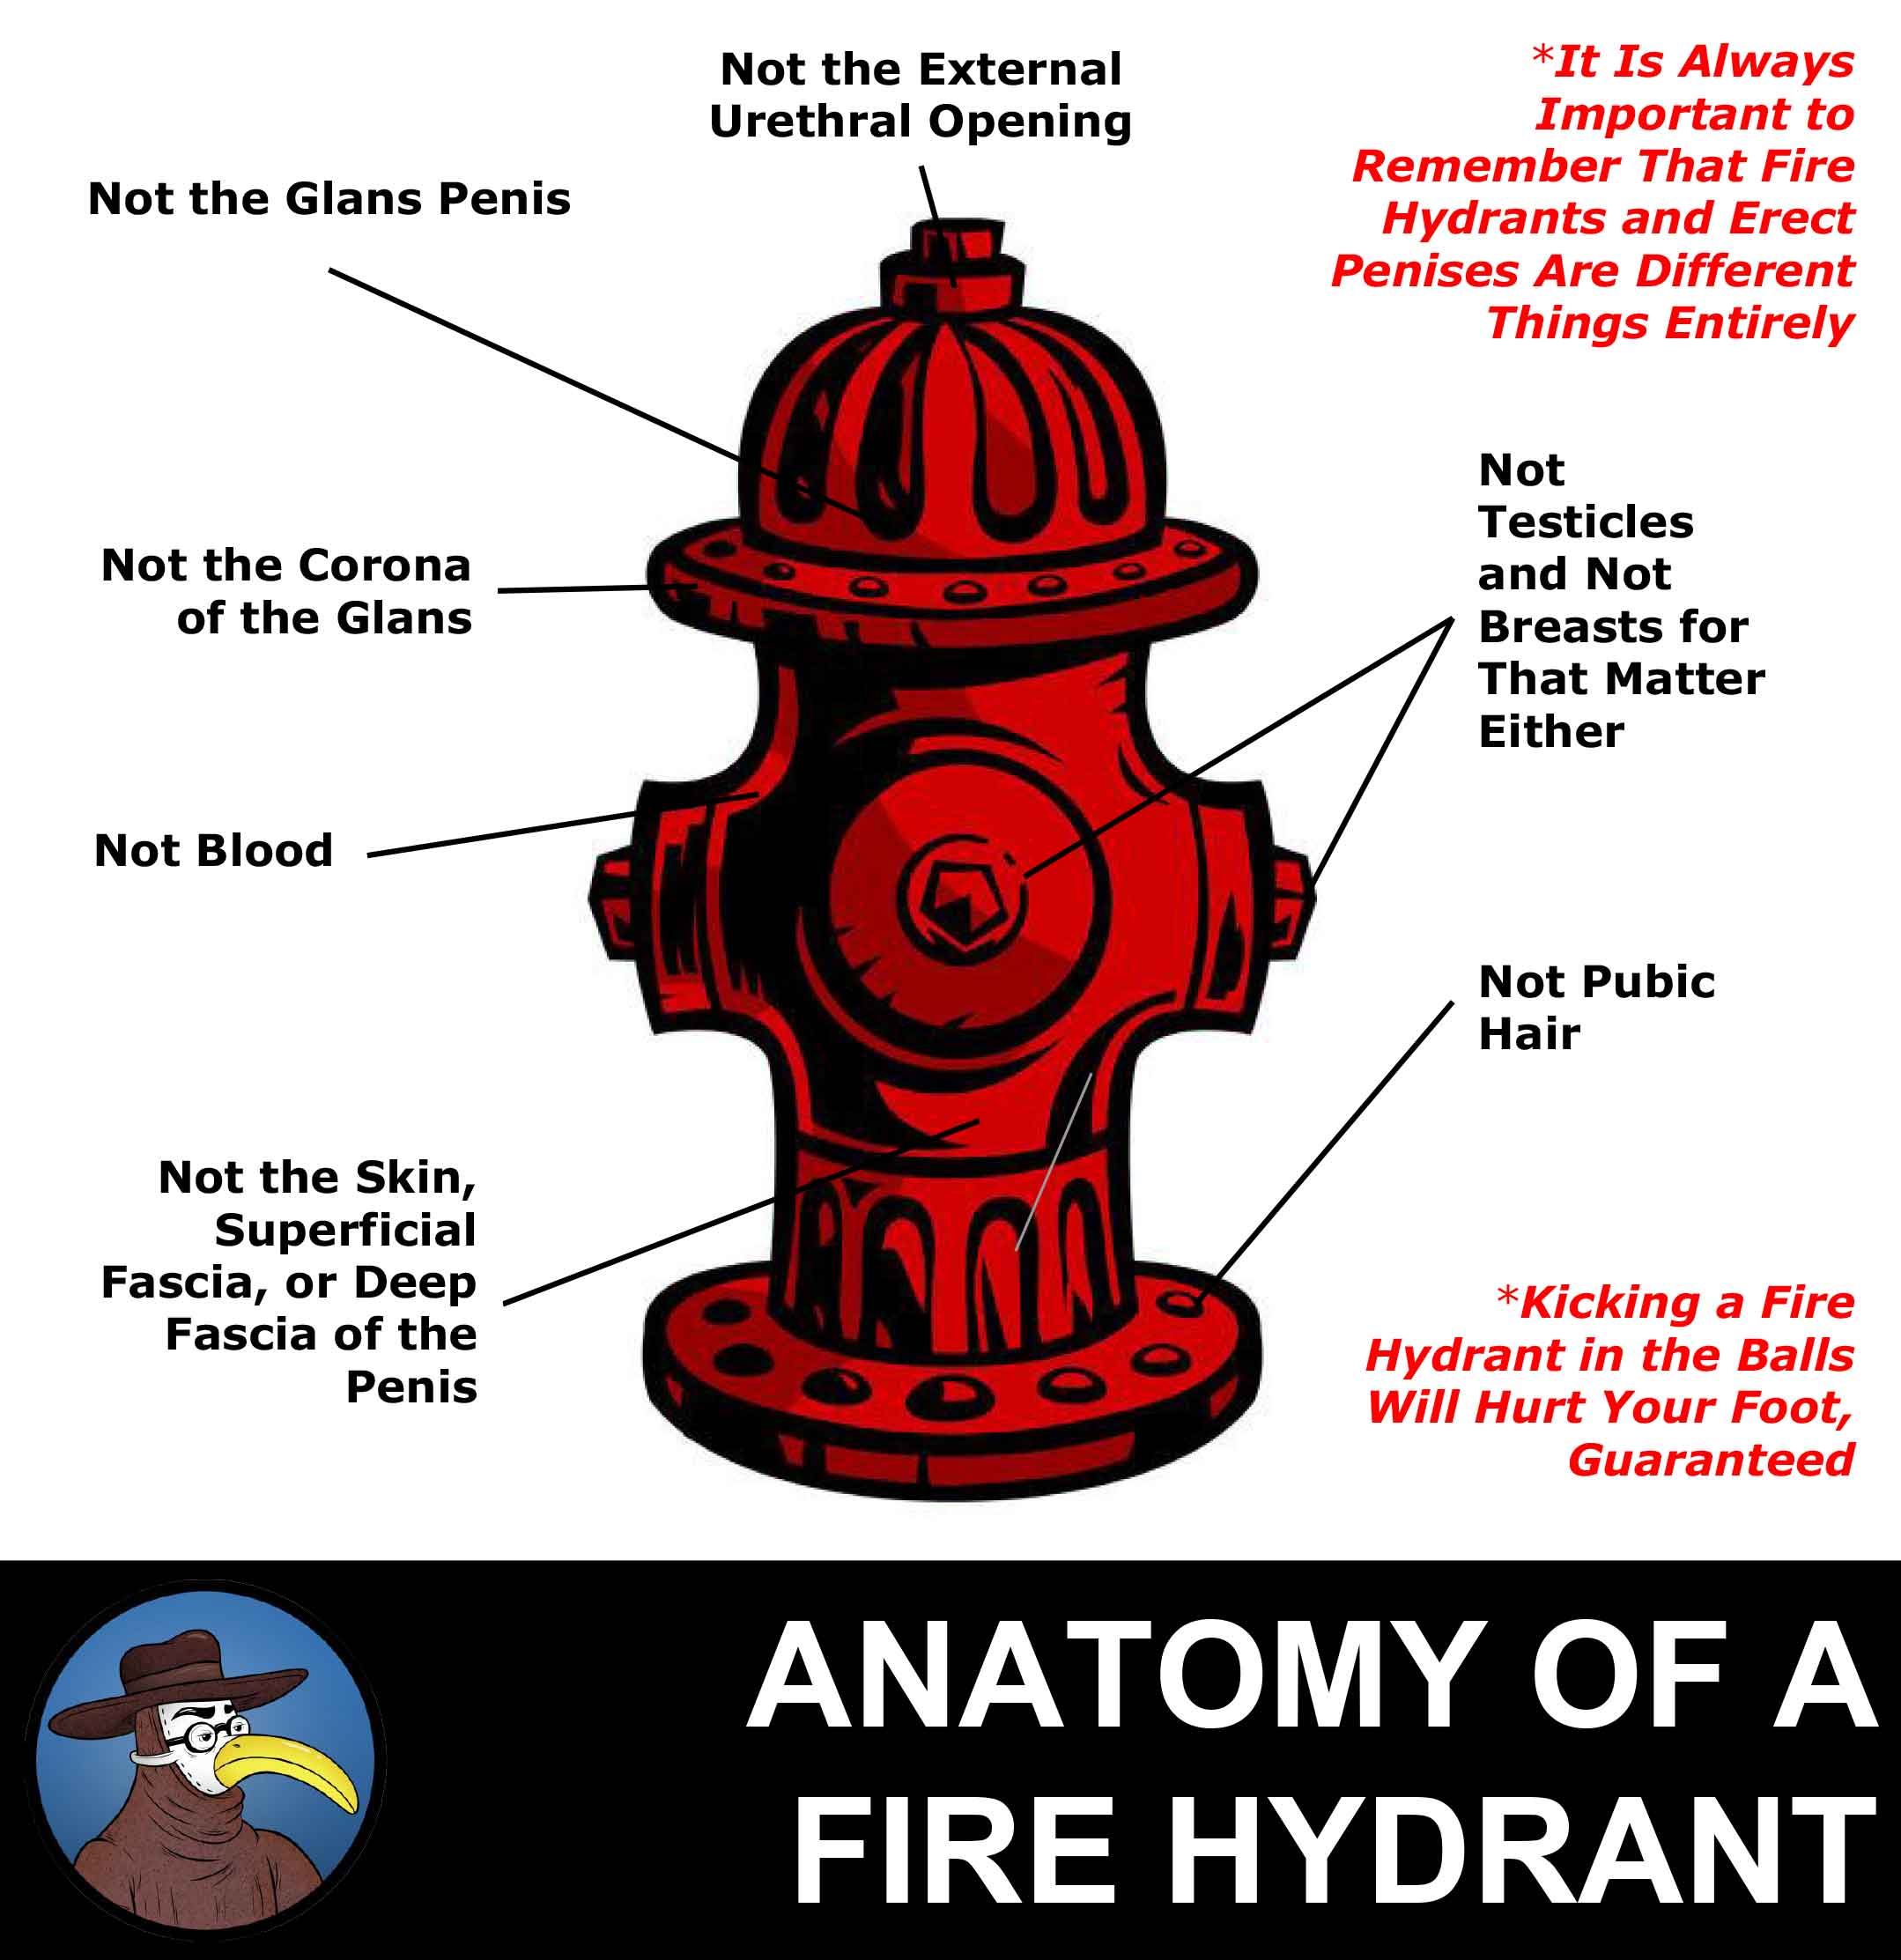 Tired Urologist Mistakes Fire Hydrant for Man with Priapism | GomerBlog